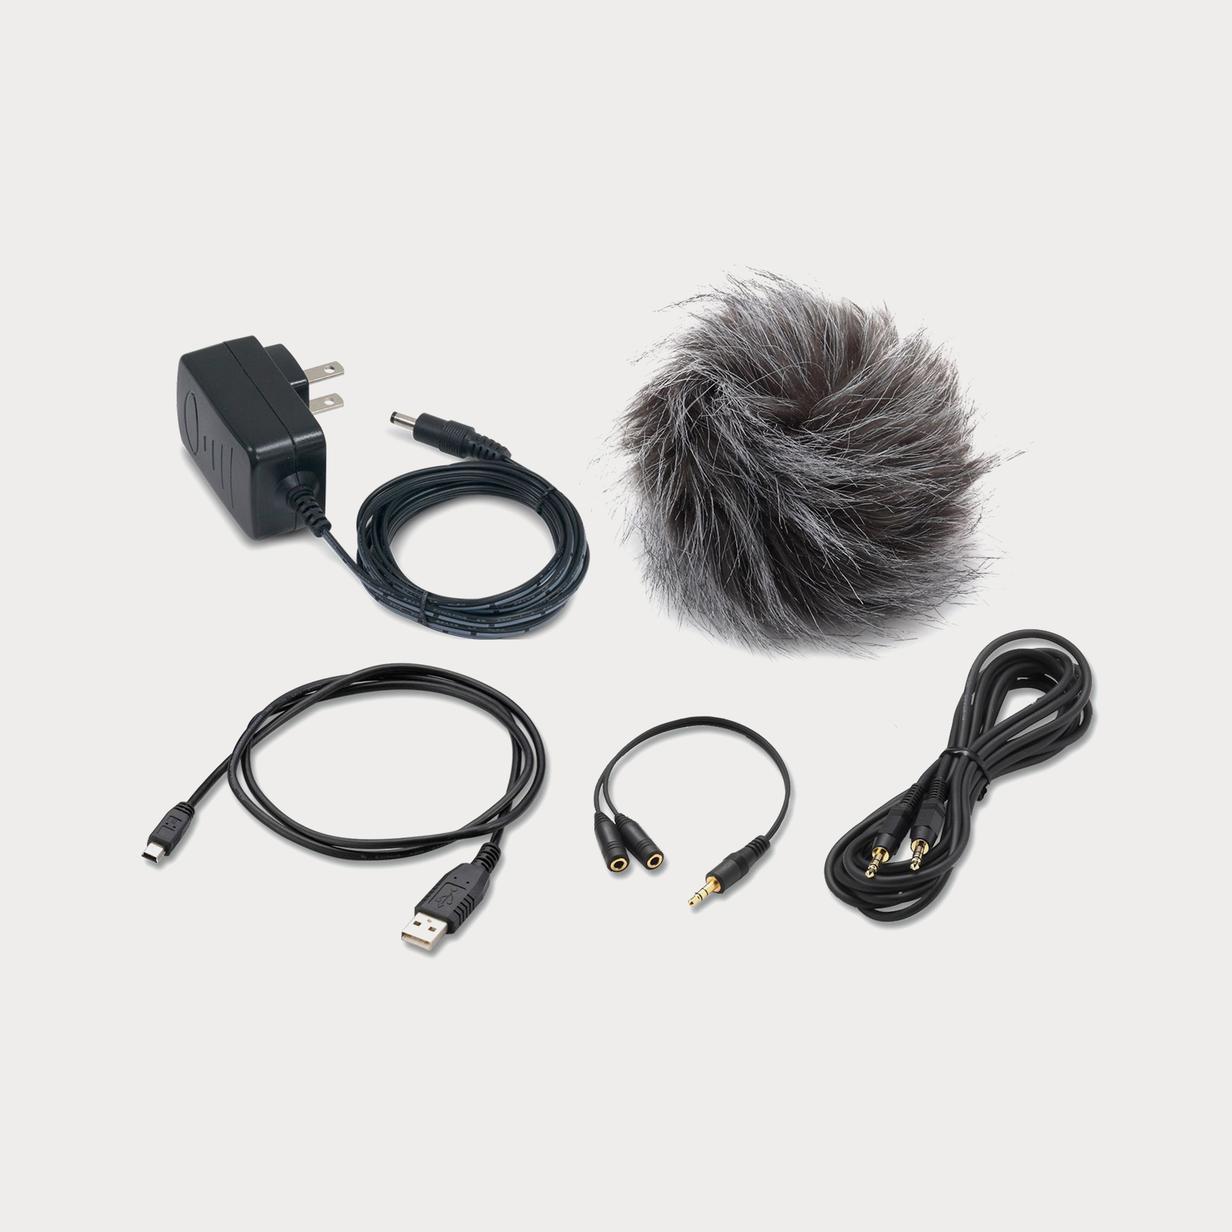 Moment zoom ZH4 NPROAP Accessory Pack for H4n Pro 01